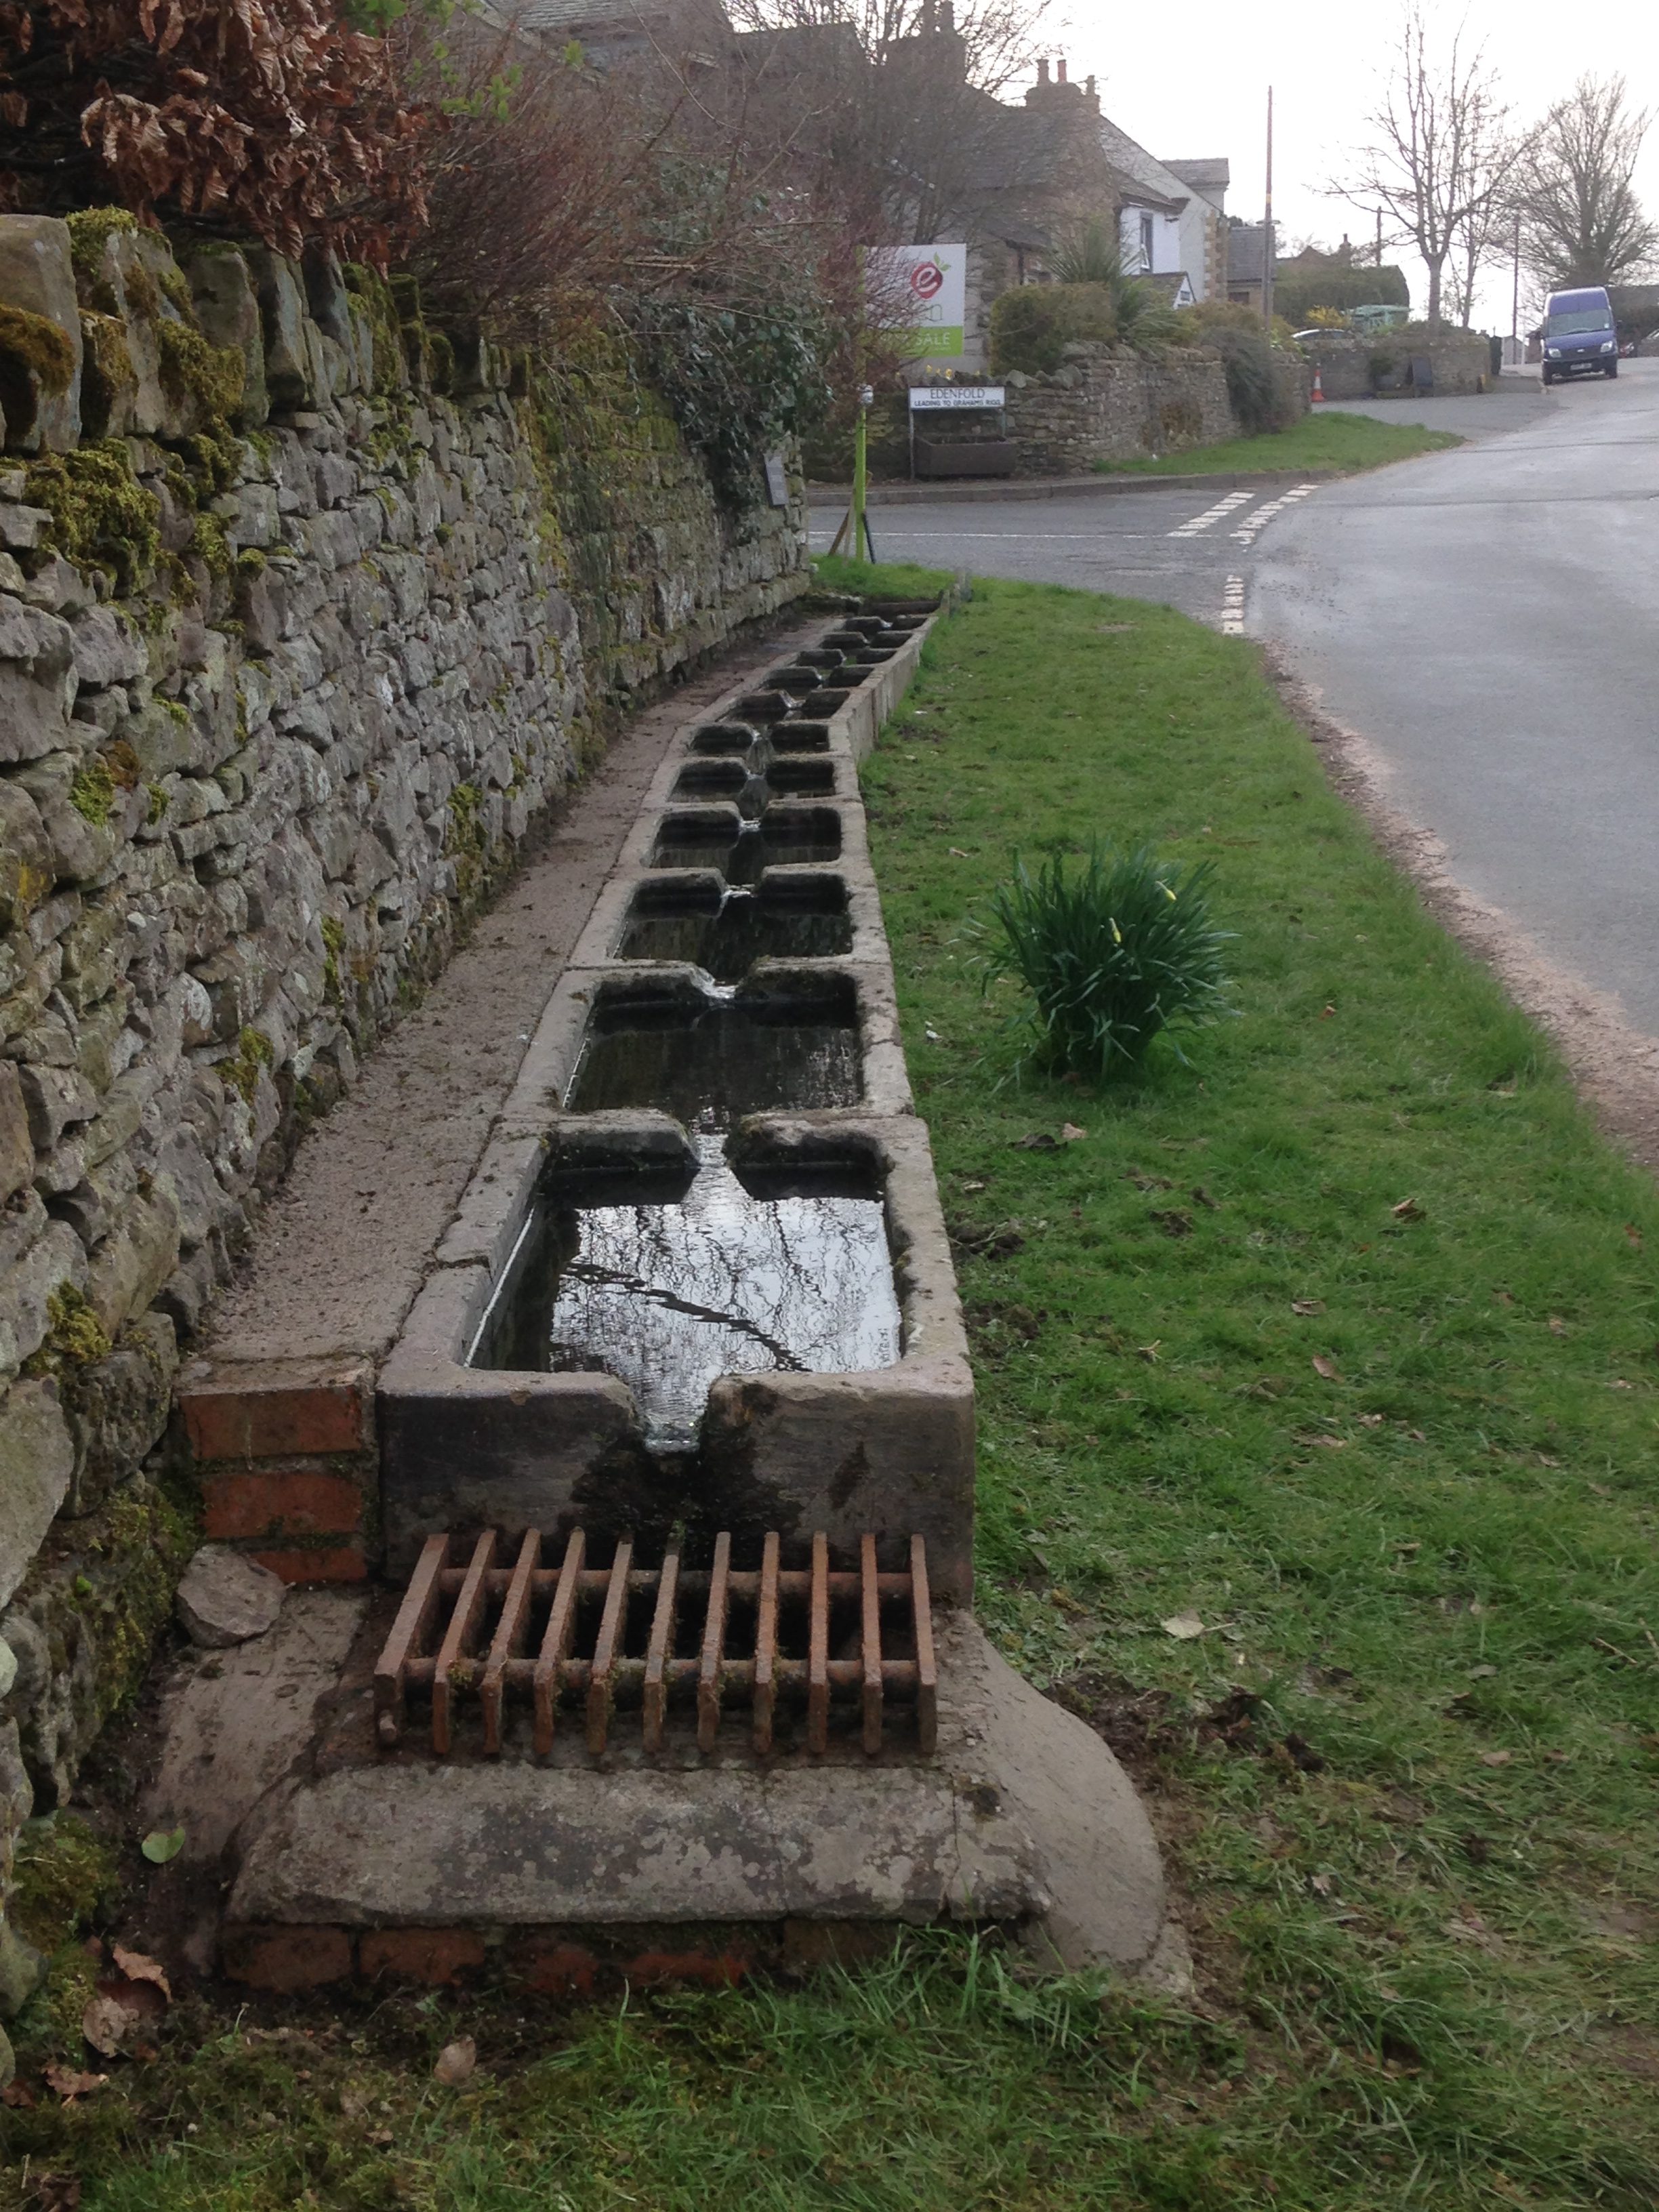 Water troughs